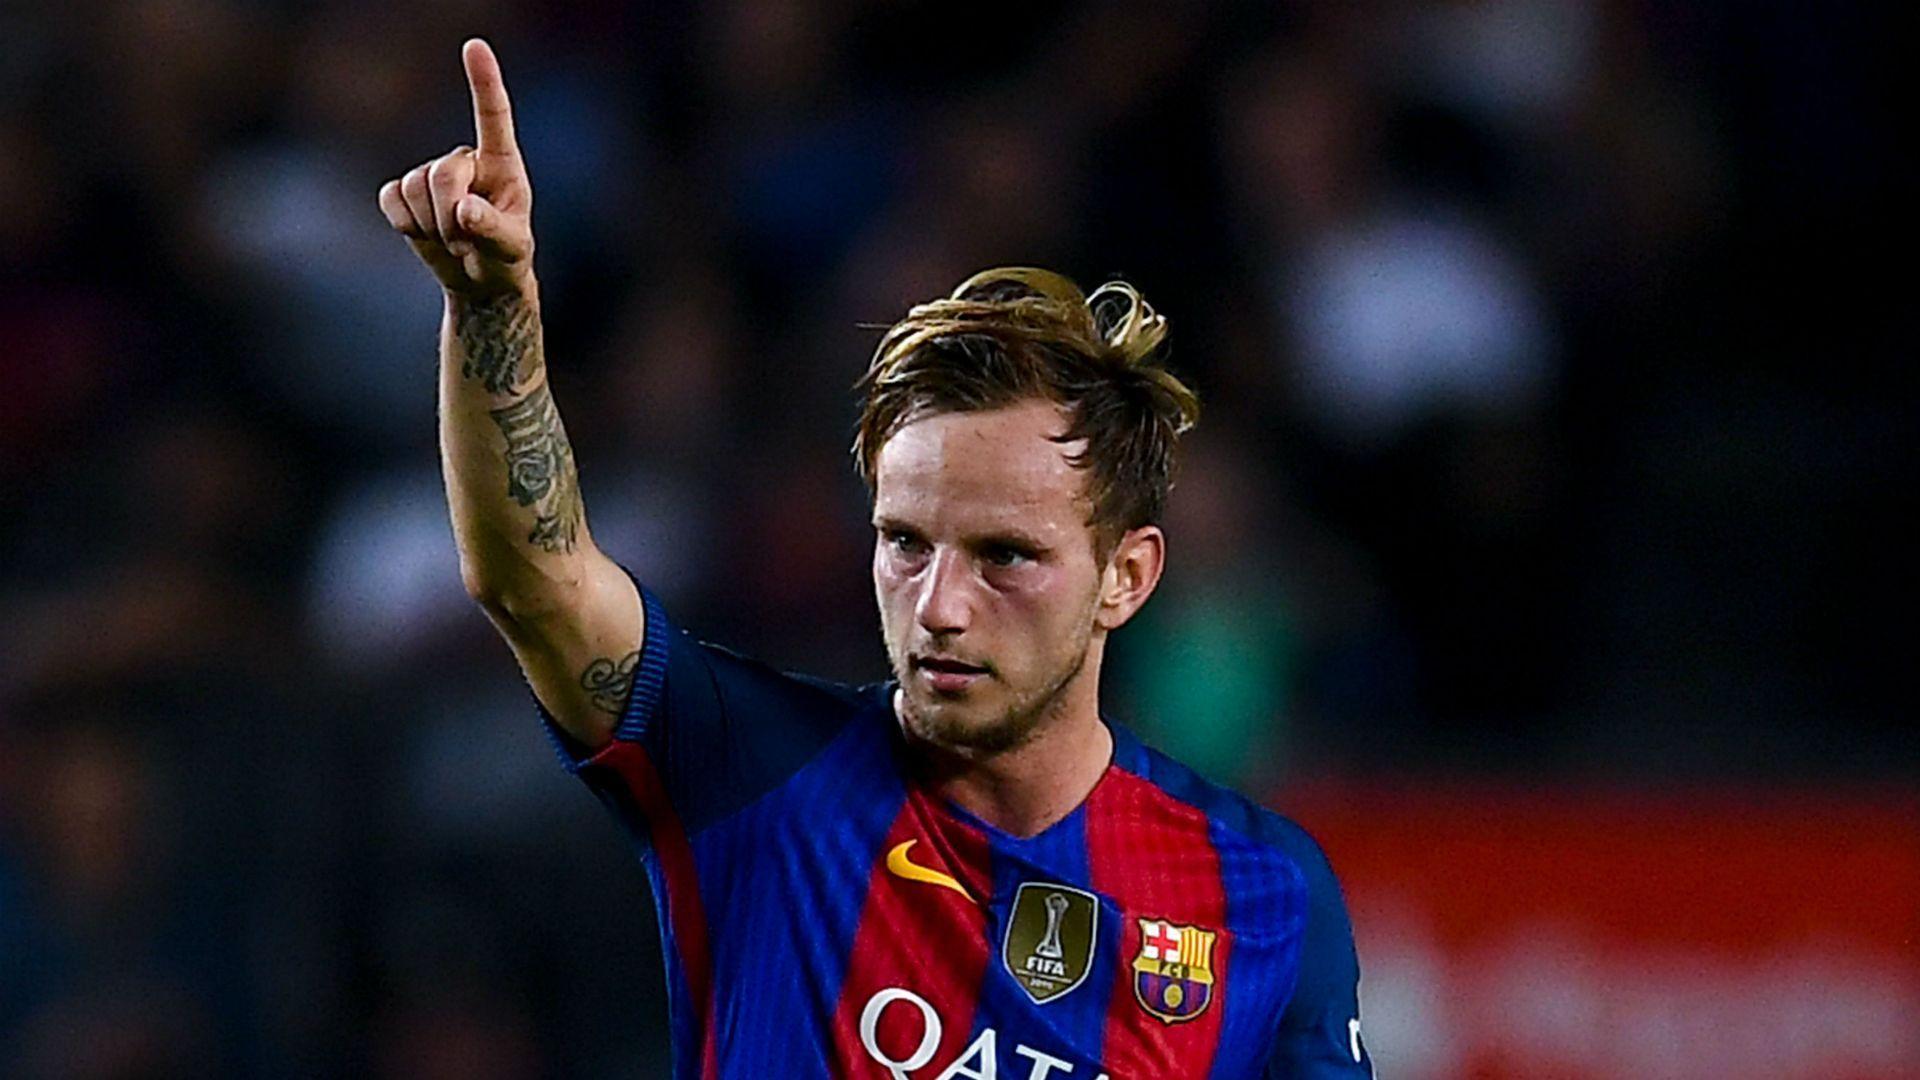 I'd never go to Barca, but it's the right place for Rakitic